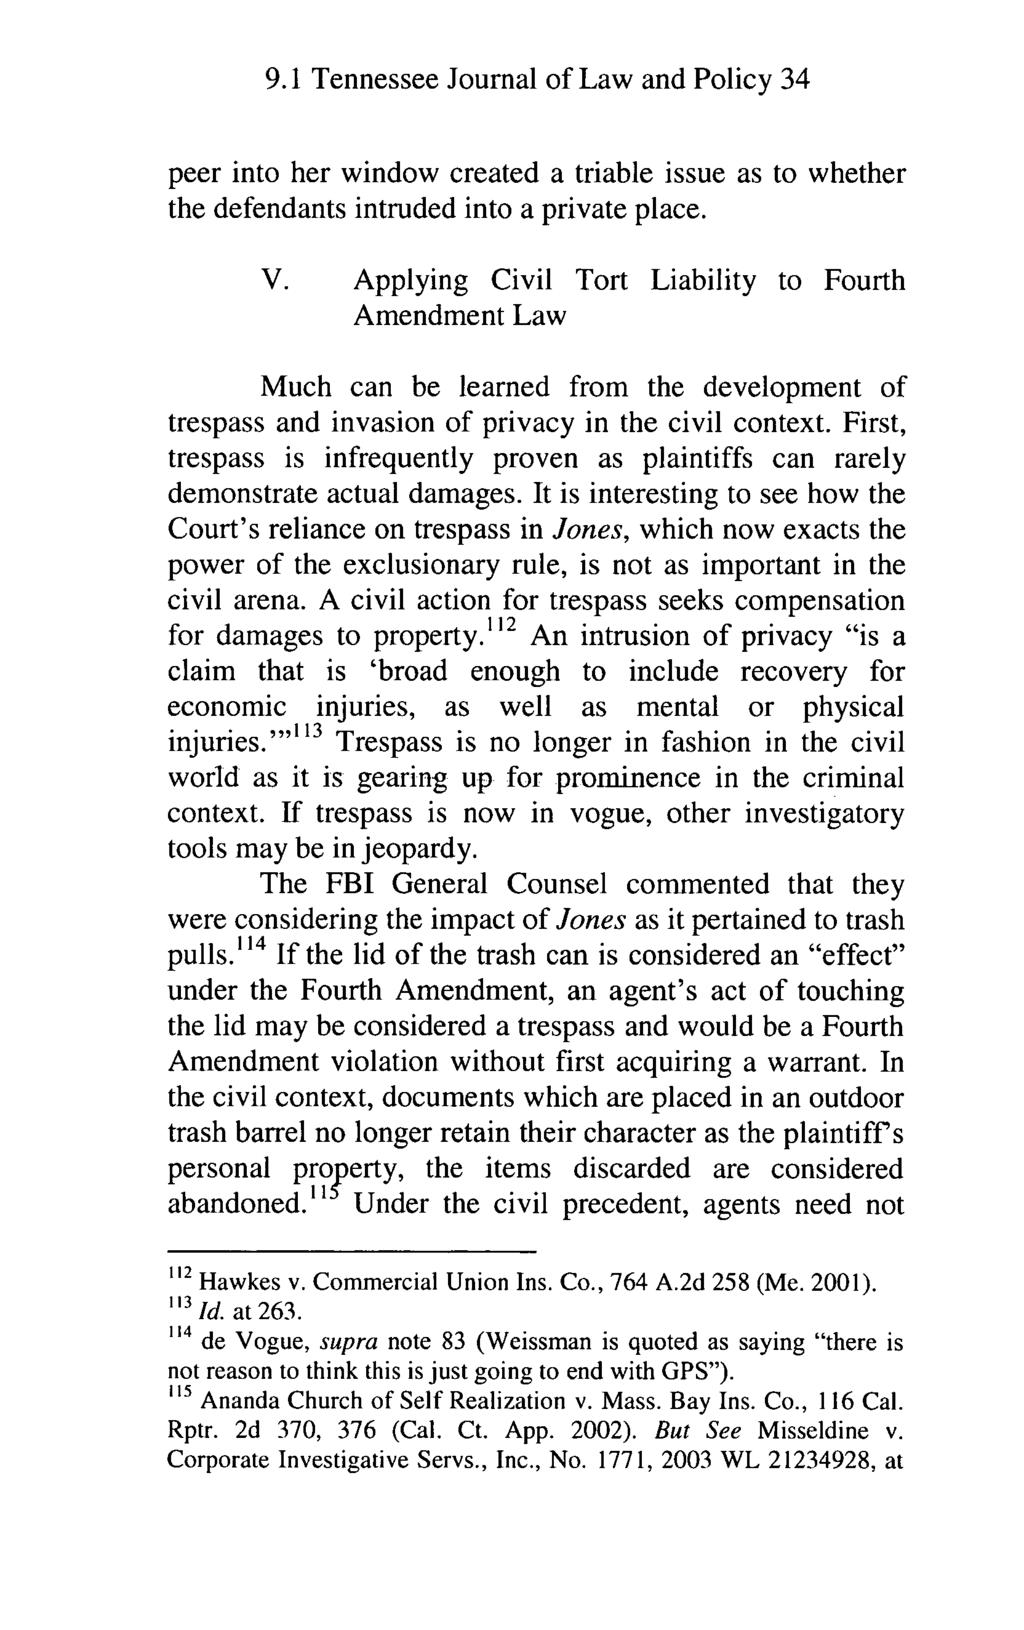 Tennessee Journal of Law and Policy, Vol. 9, Iss. 1 [2013], Art. 3 9.